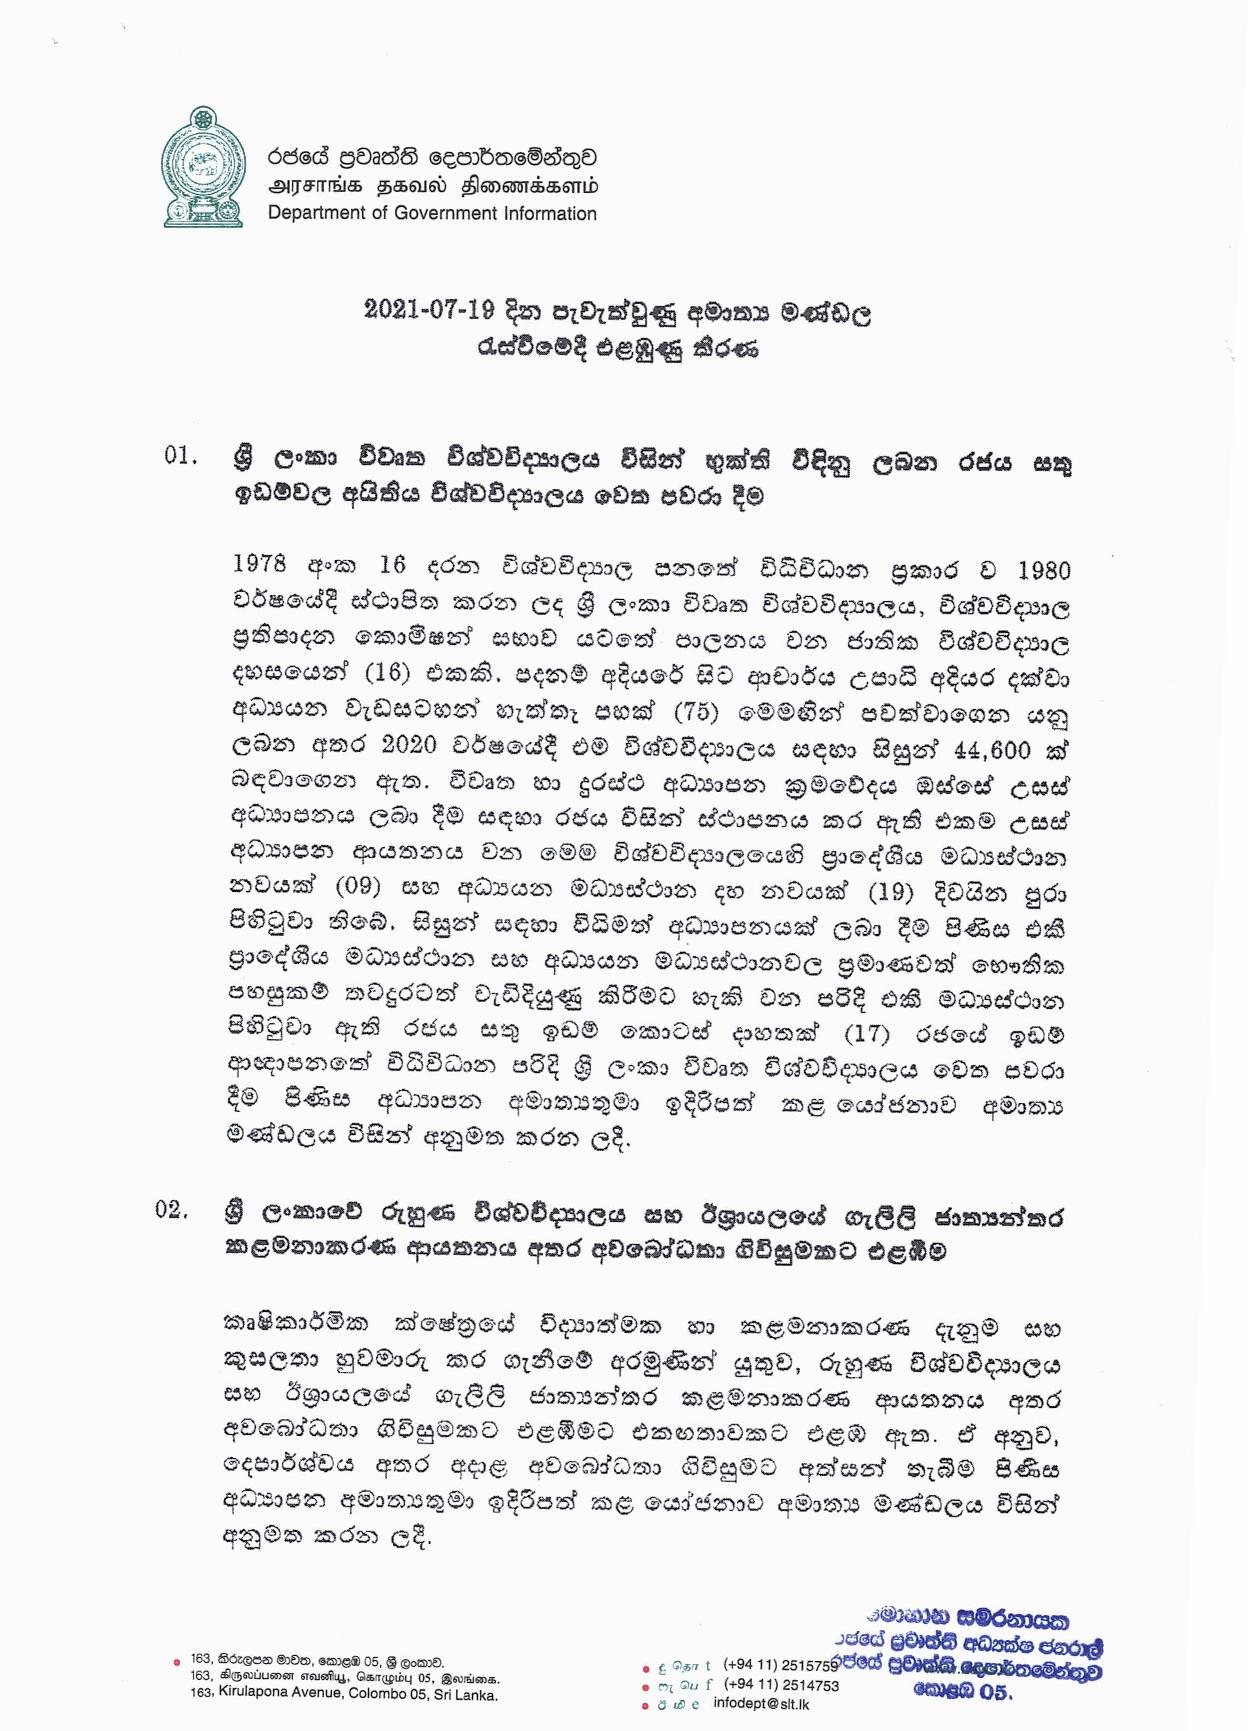 Cabinet decision on 19.07.2021 Sinhala page 001